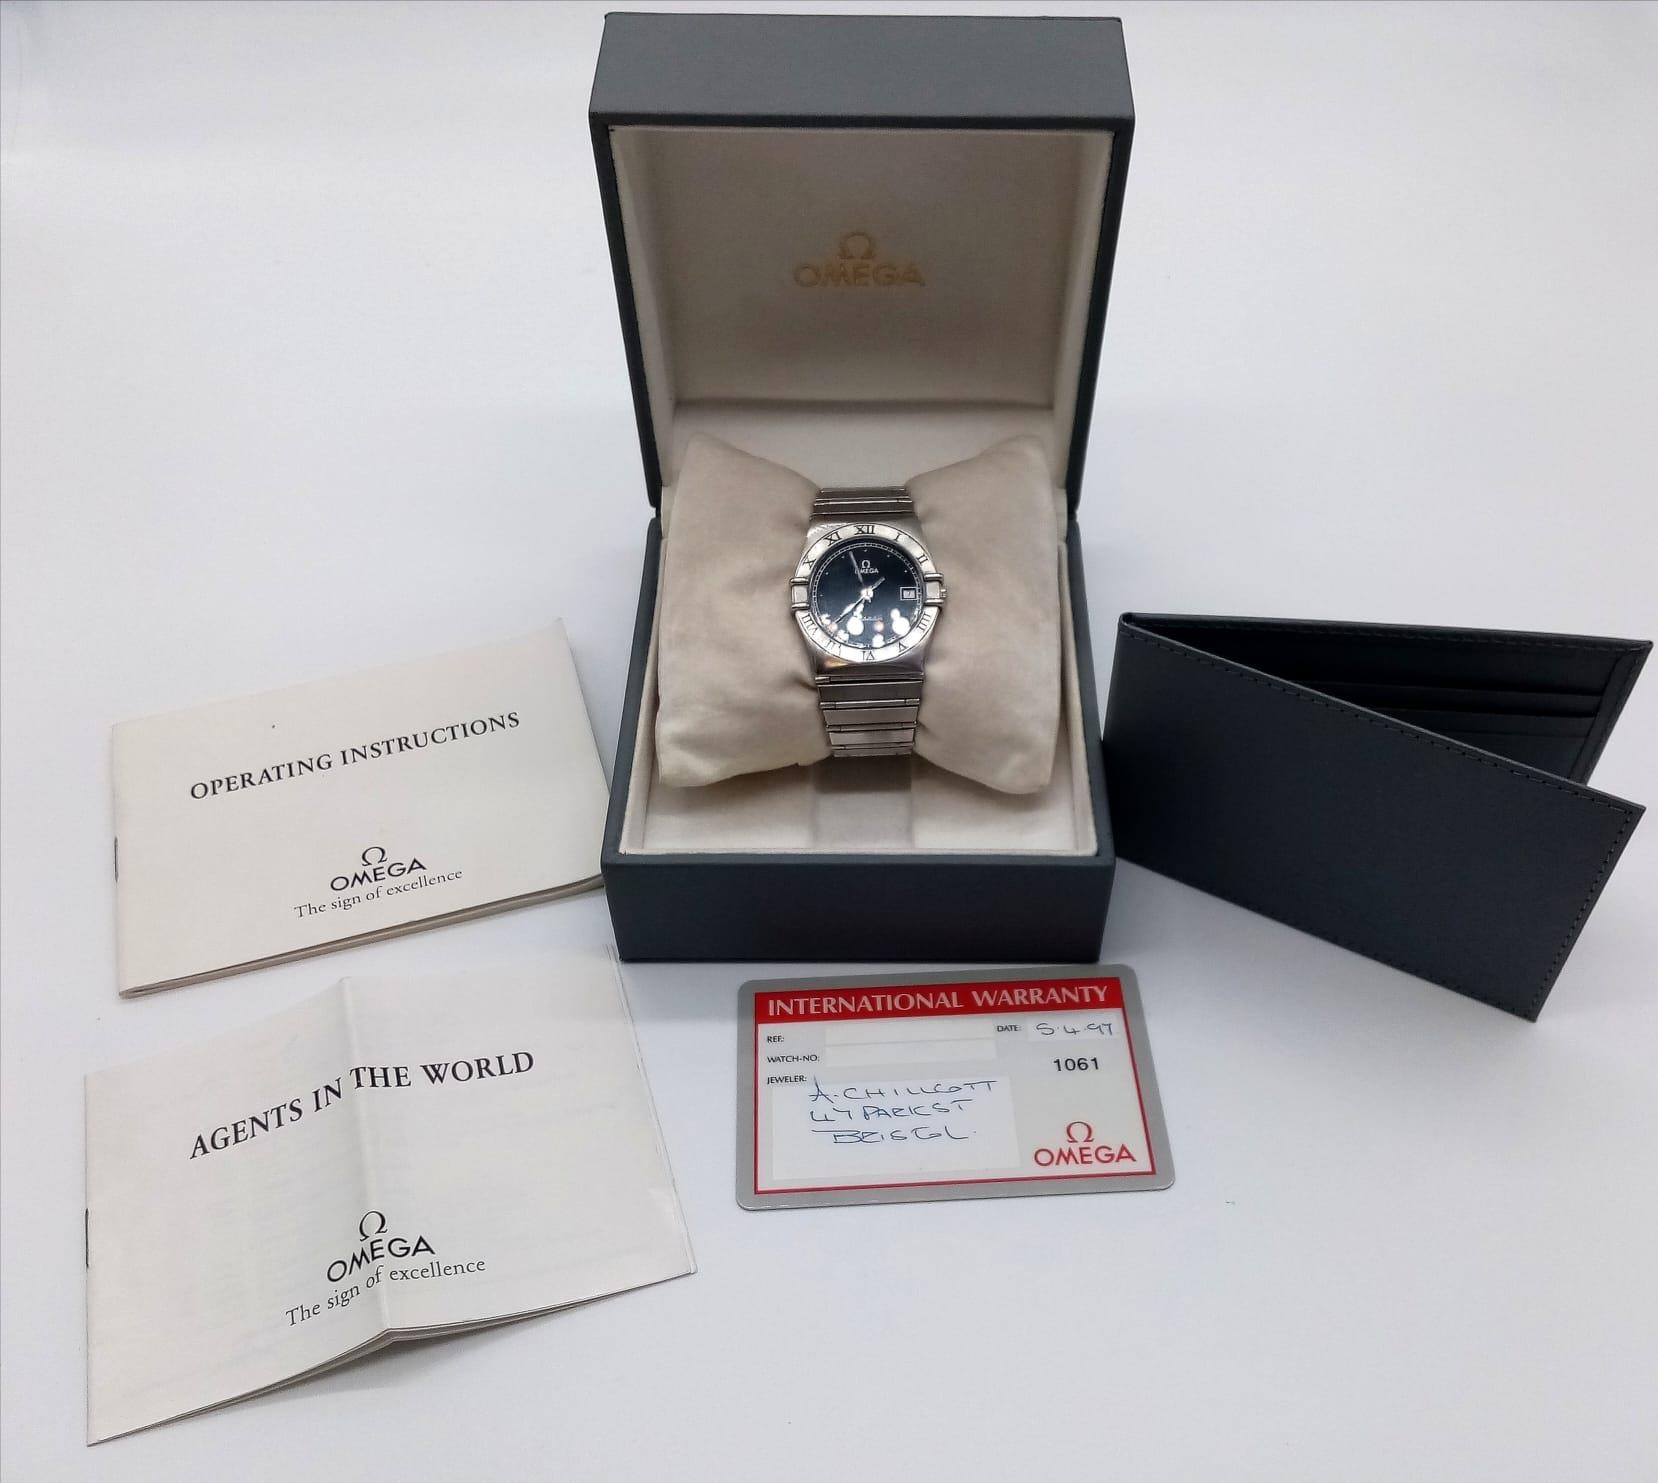 OMEGA CONSTELATION QUARTZ BRACELET WATCH WITH ORIGINAL BOX AND PAPERS. 32mm. Needs batteries.